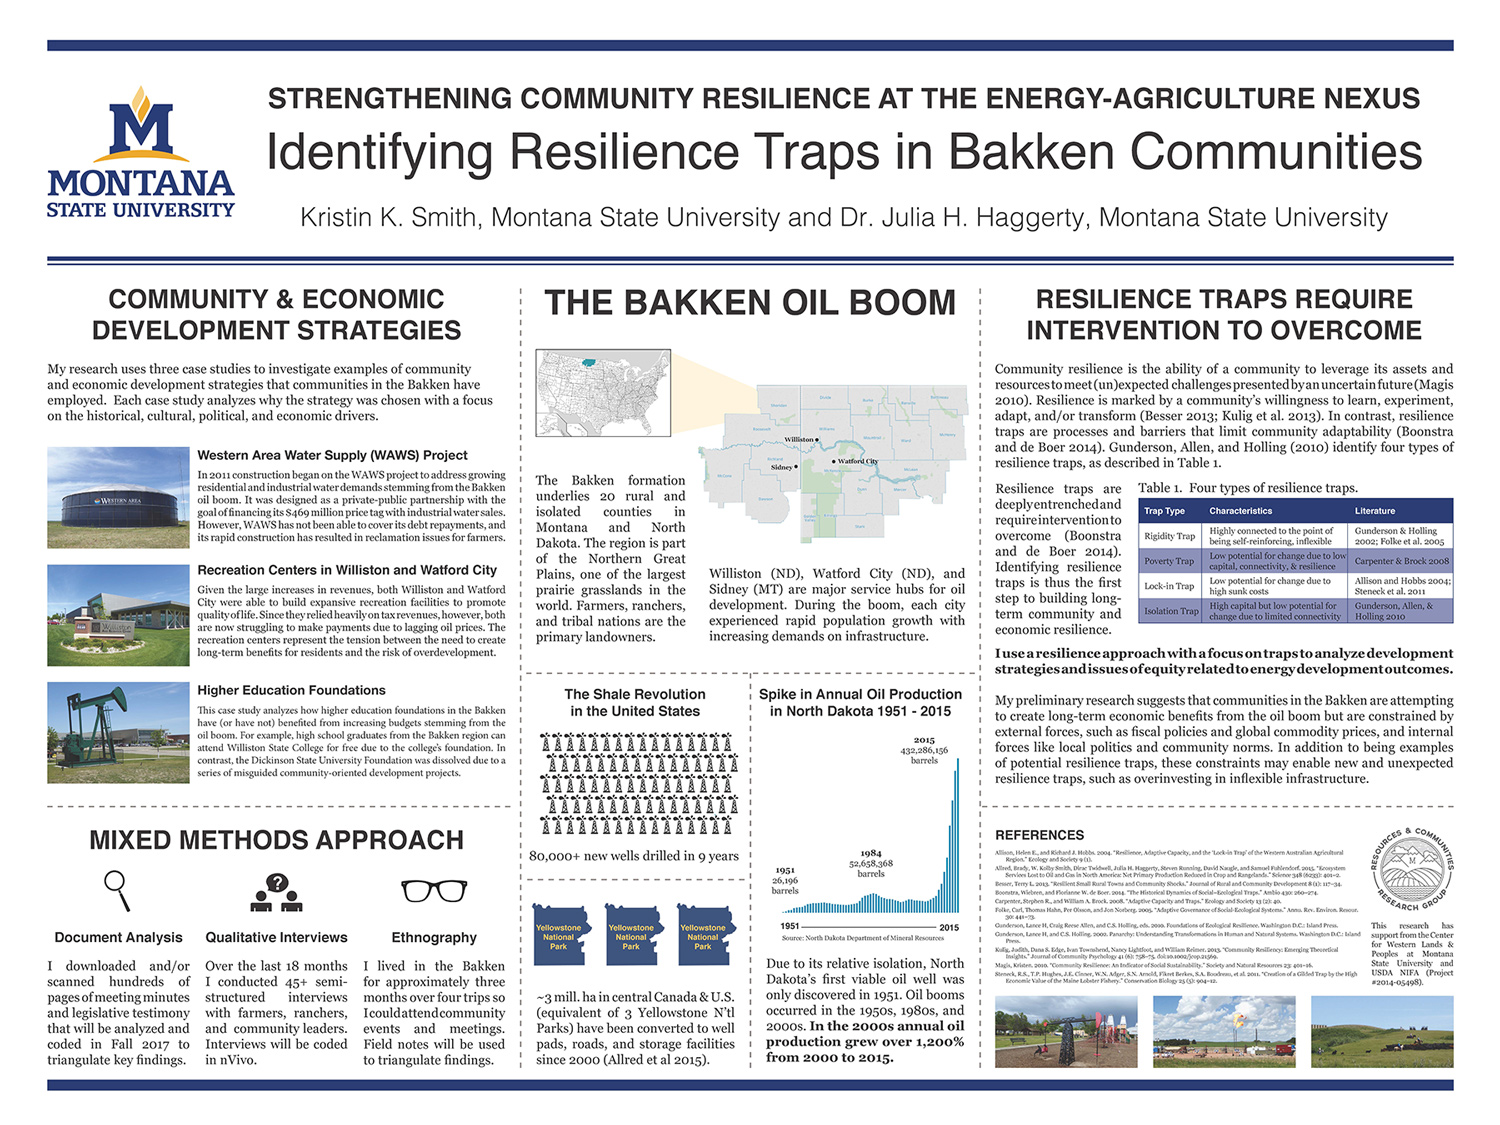 Strengthening Community Resilience at the Energy-Agriculture Nexus: Identifying Resilience Traps in Bakken Communities